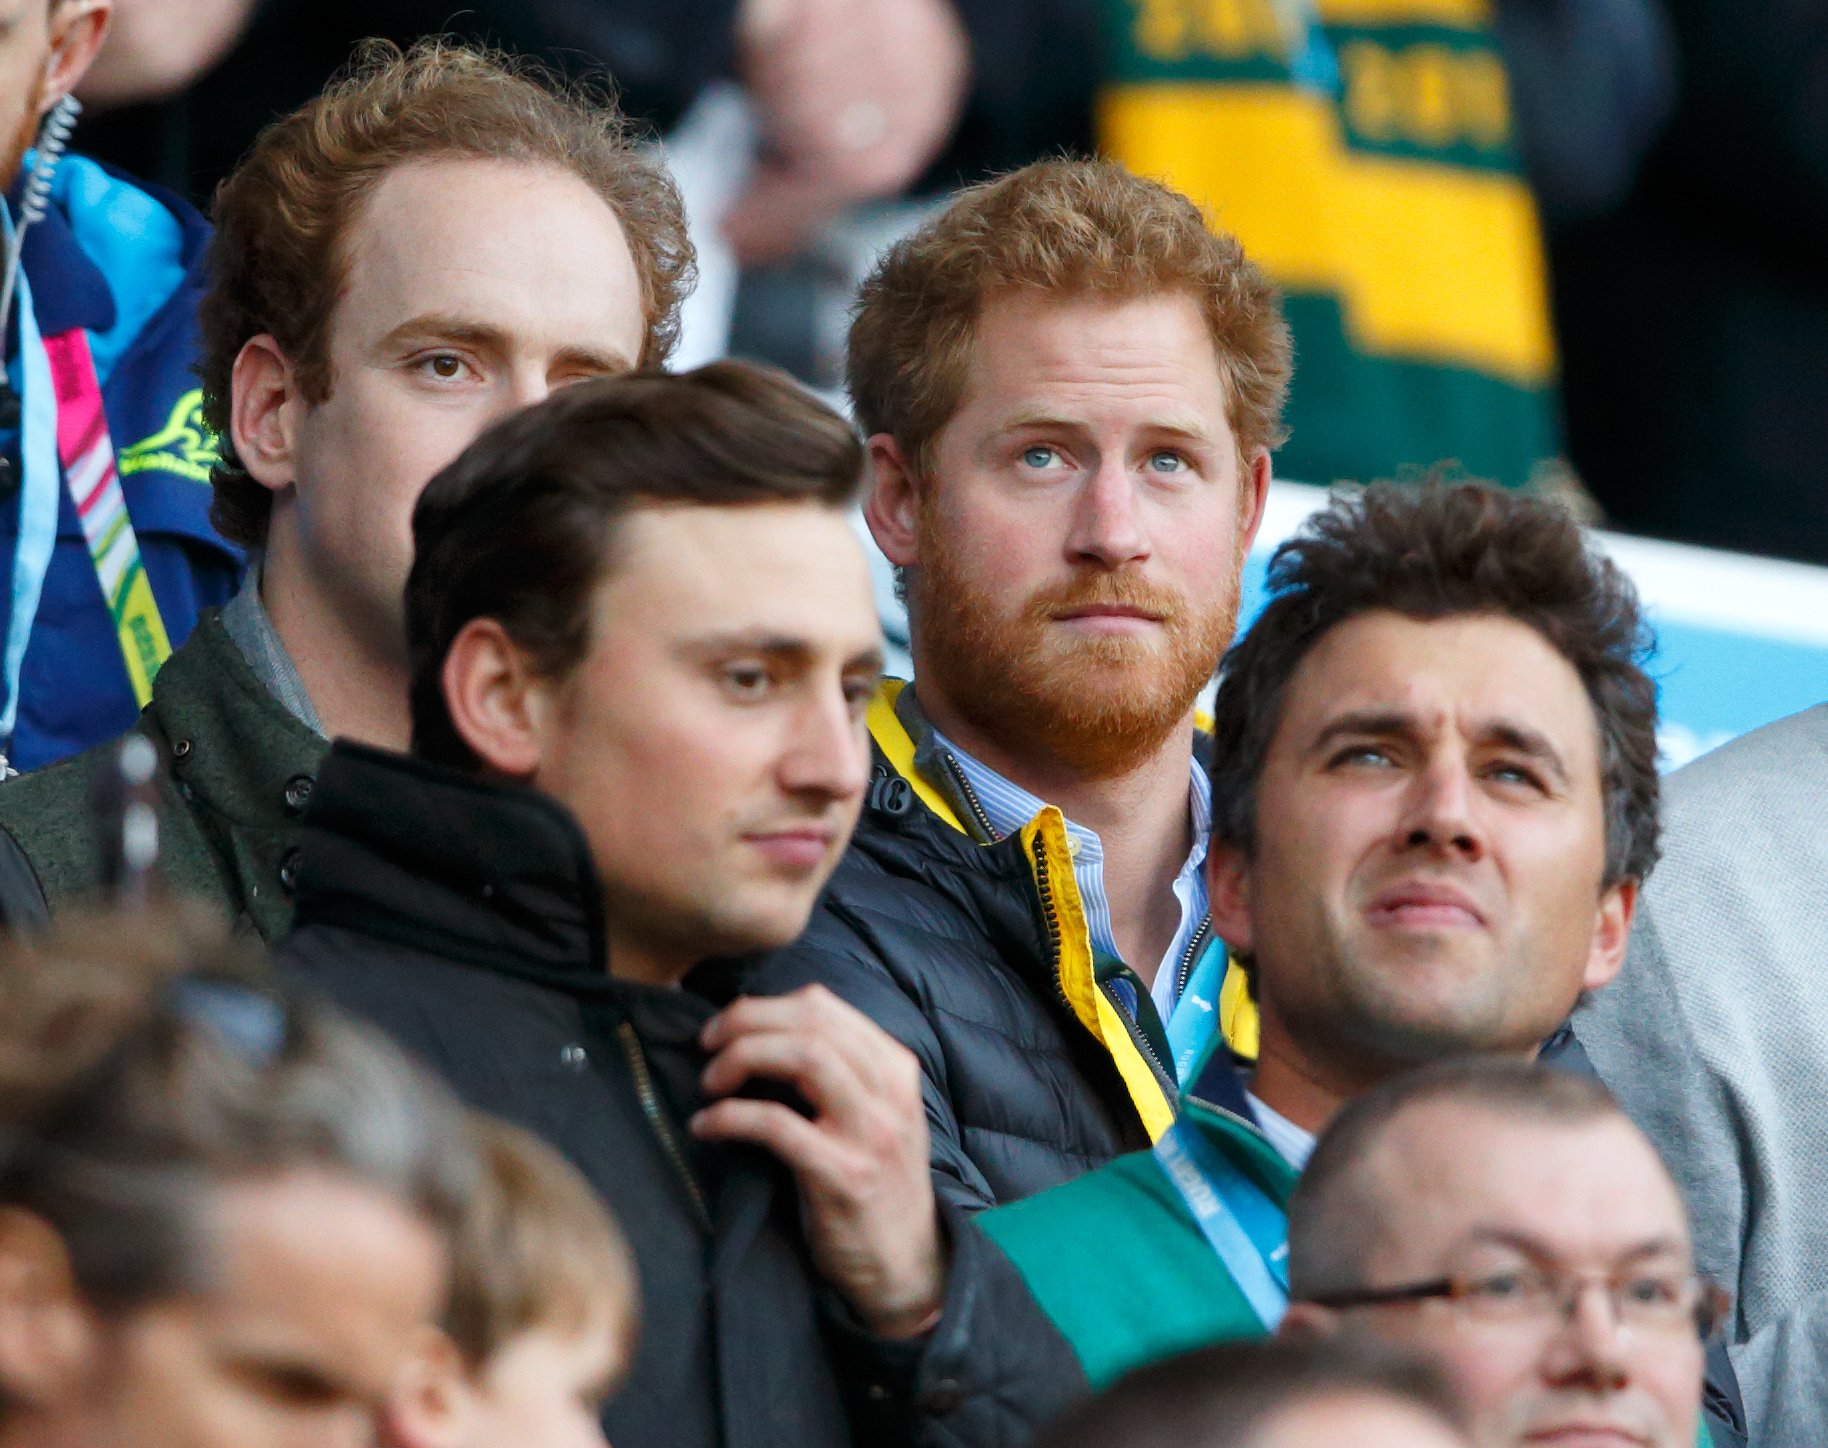 Tom Inskip, Charlie van Straubenzee, Prince Harry and Thomas van Straubenzee attending the 2015 Rugby World Cup Semi Final match between Argentina and Australia at Twickenham Stadium on October 25, 2015 in London, England. | Source: Getty Images